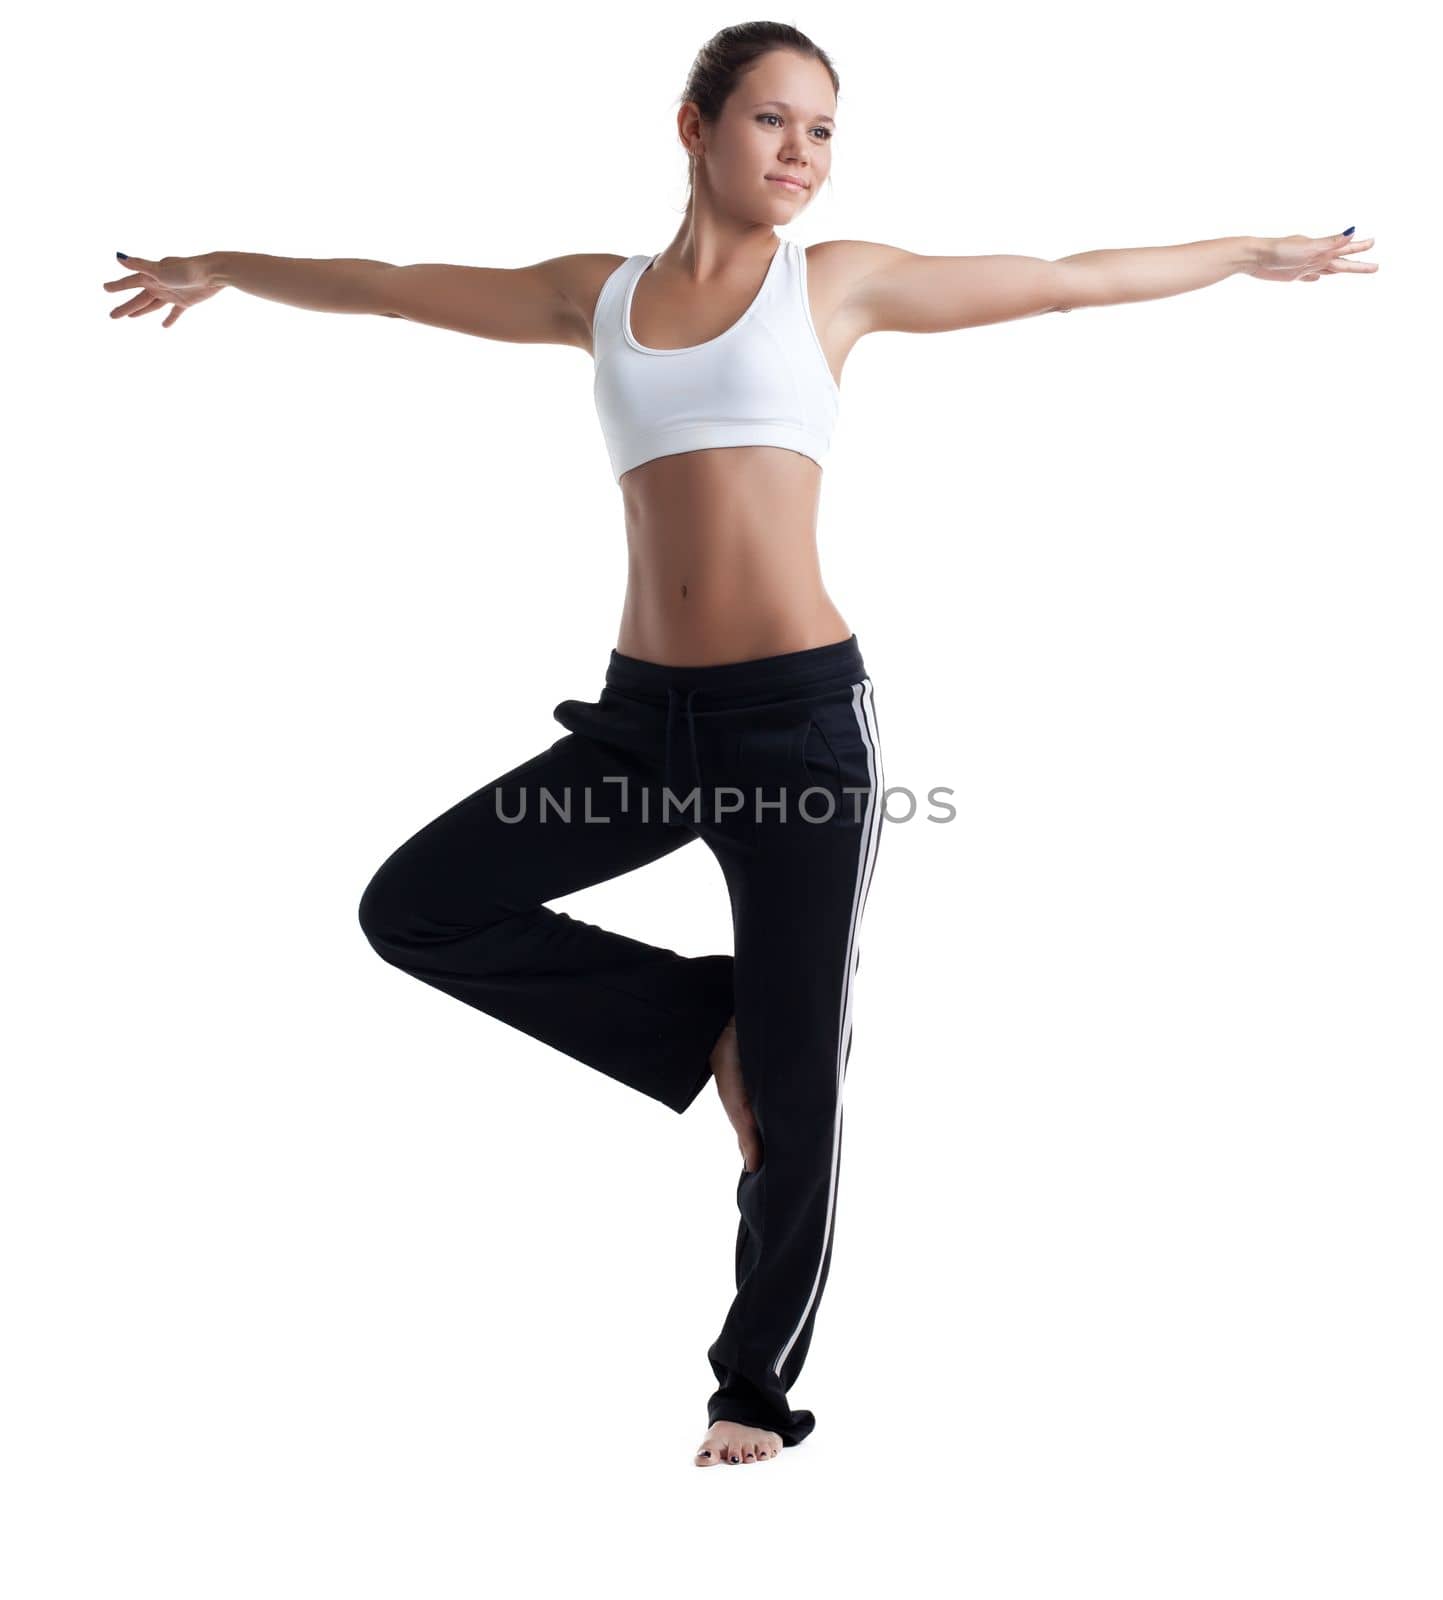 Young girl with perfect body posing in fitness costume isolated